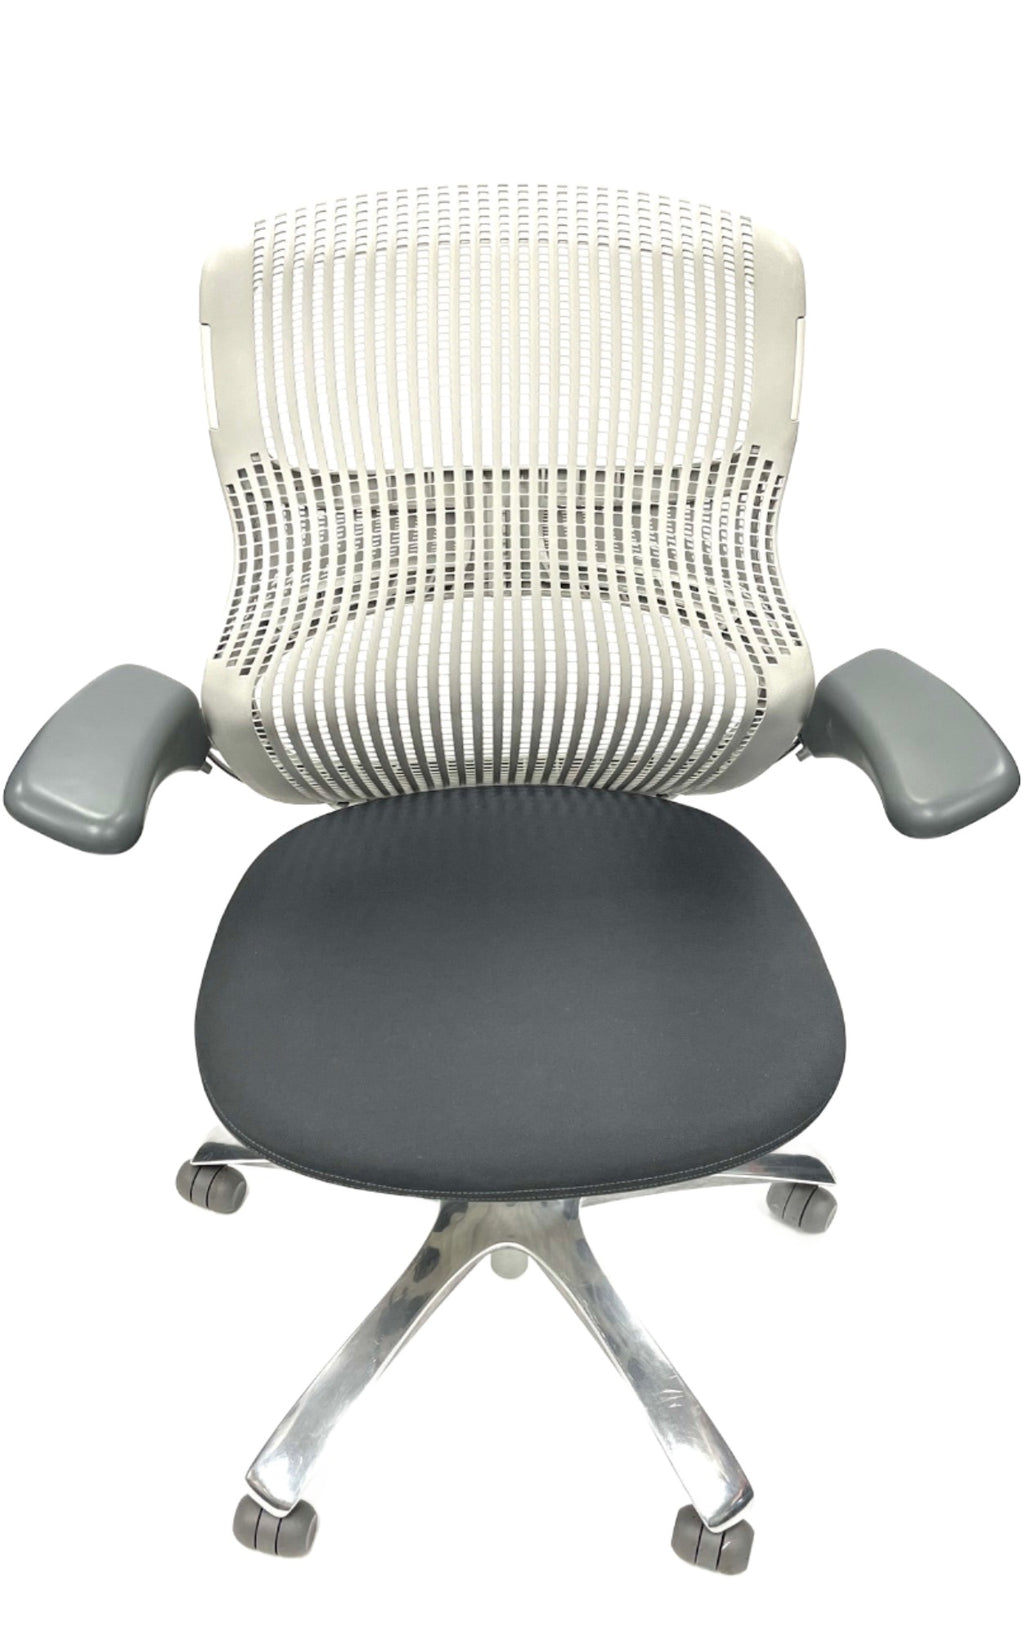 Pre-Owned Generation Task Chair